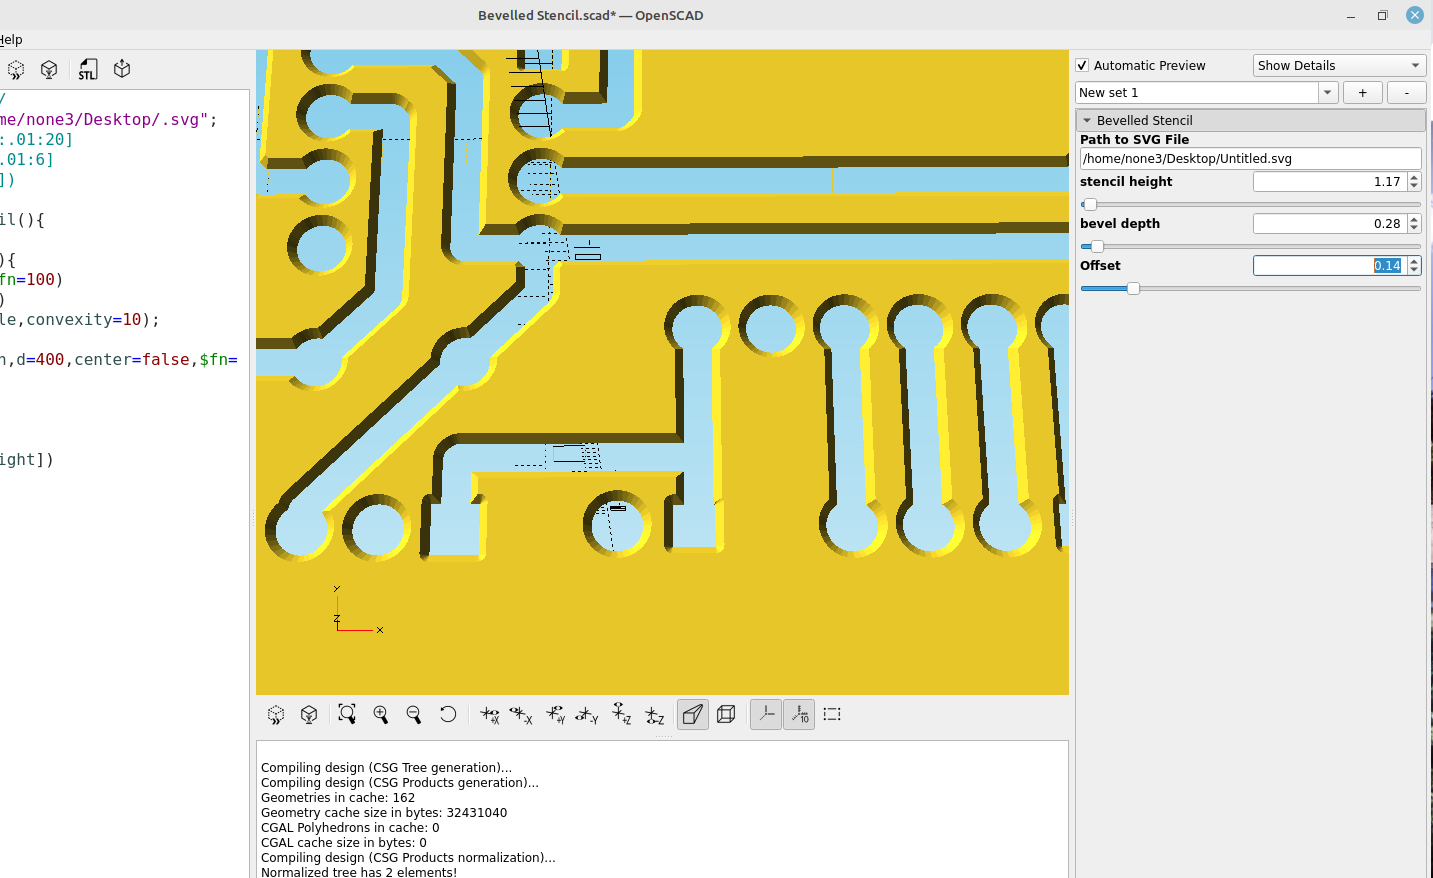 3D part design with OpenSCAD #80: Using roof() to make a beveled stencil